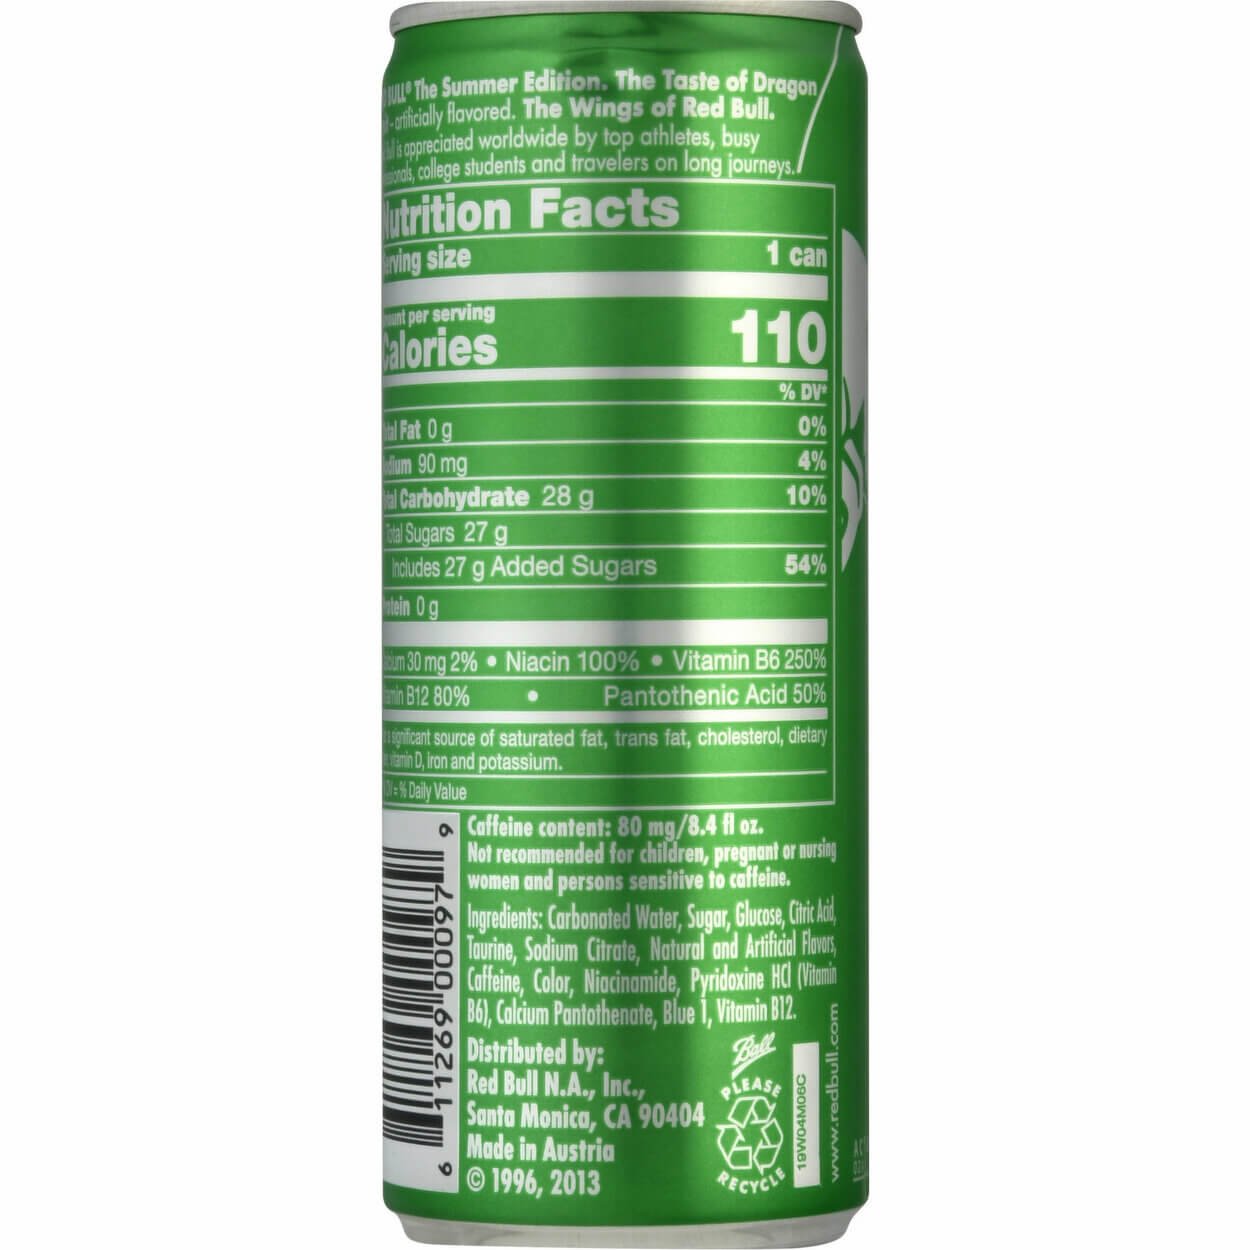 Image of Ingredient List on Red Bull energy drink.